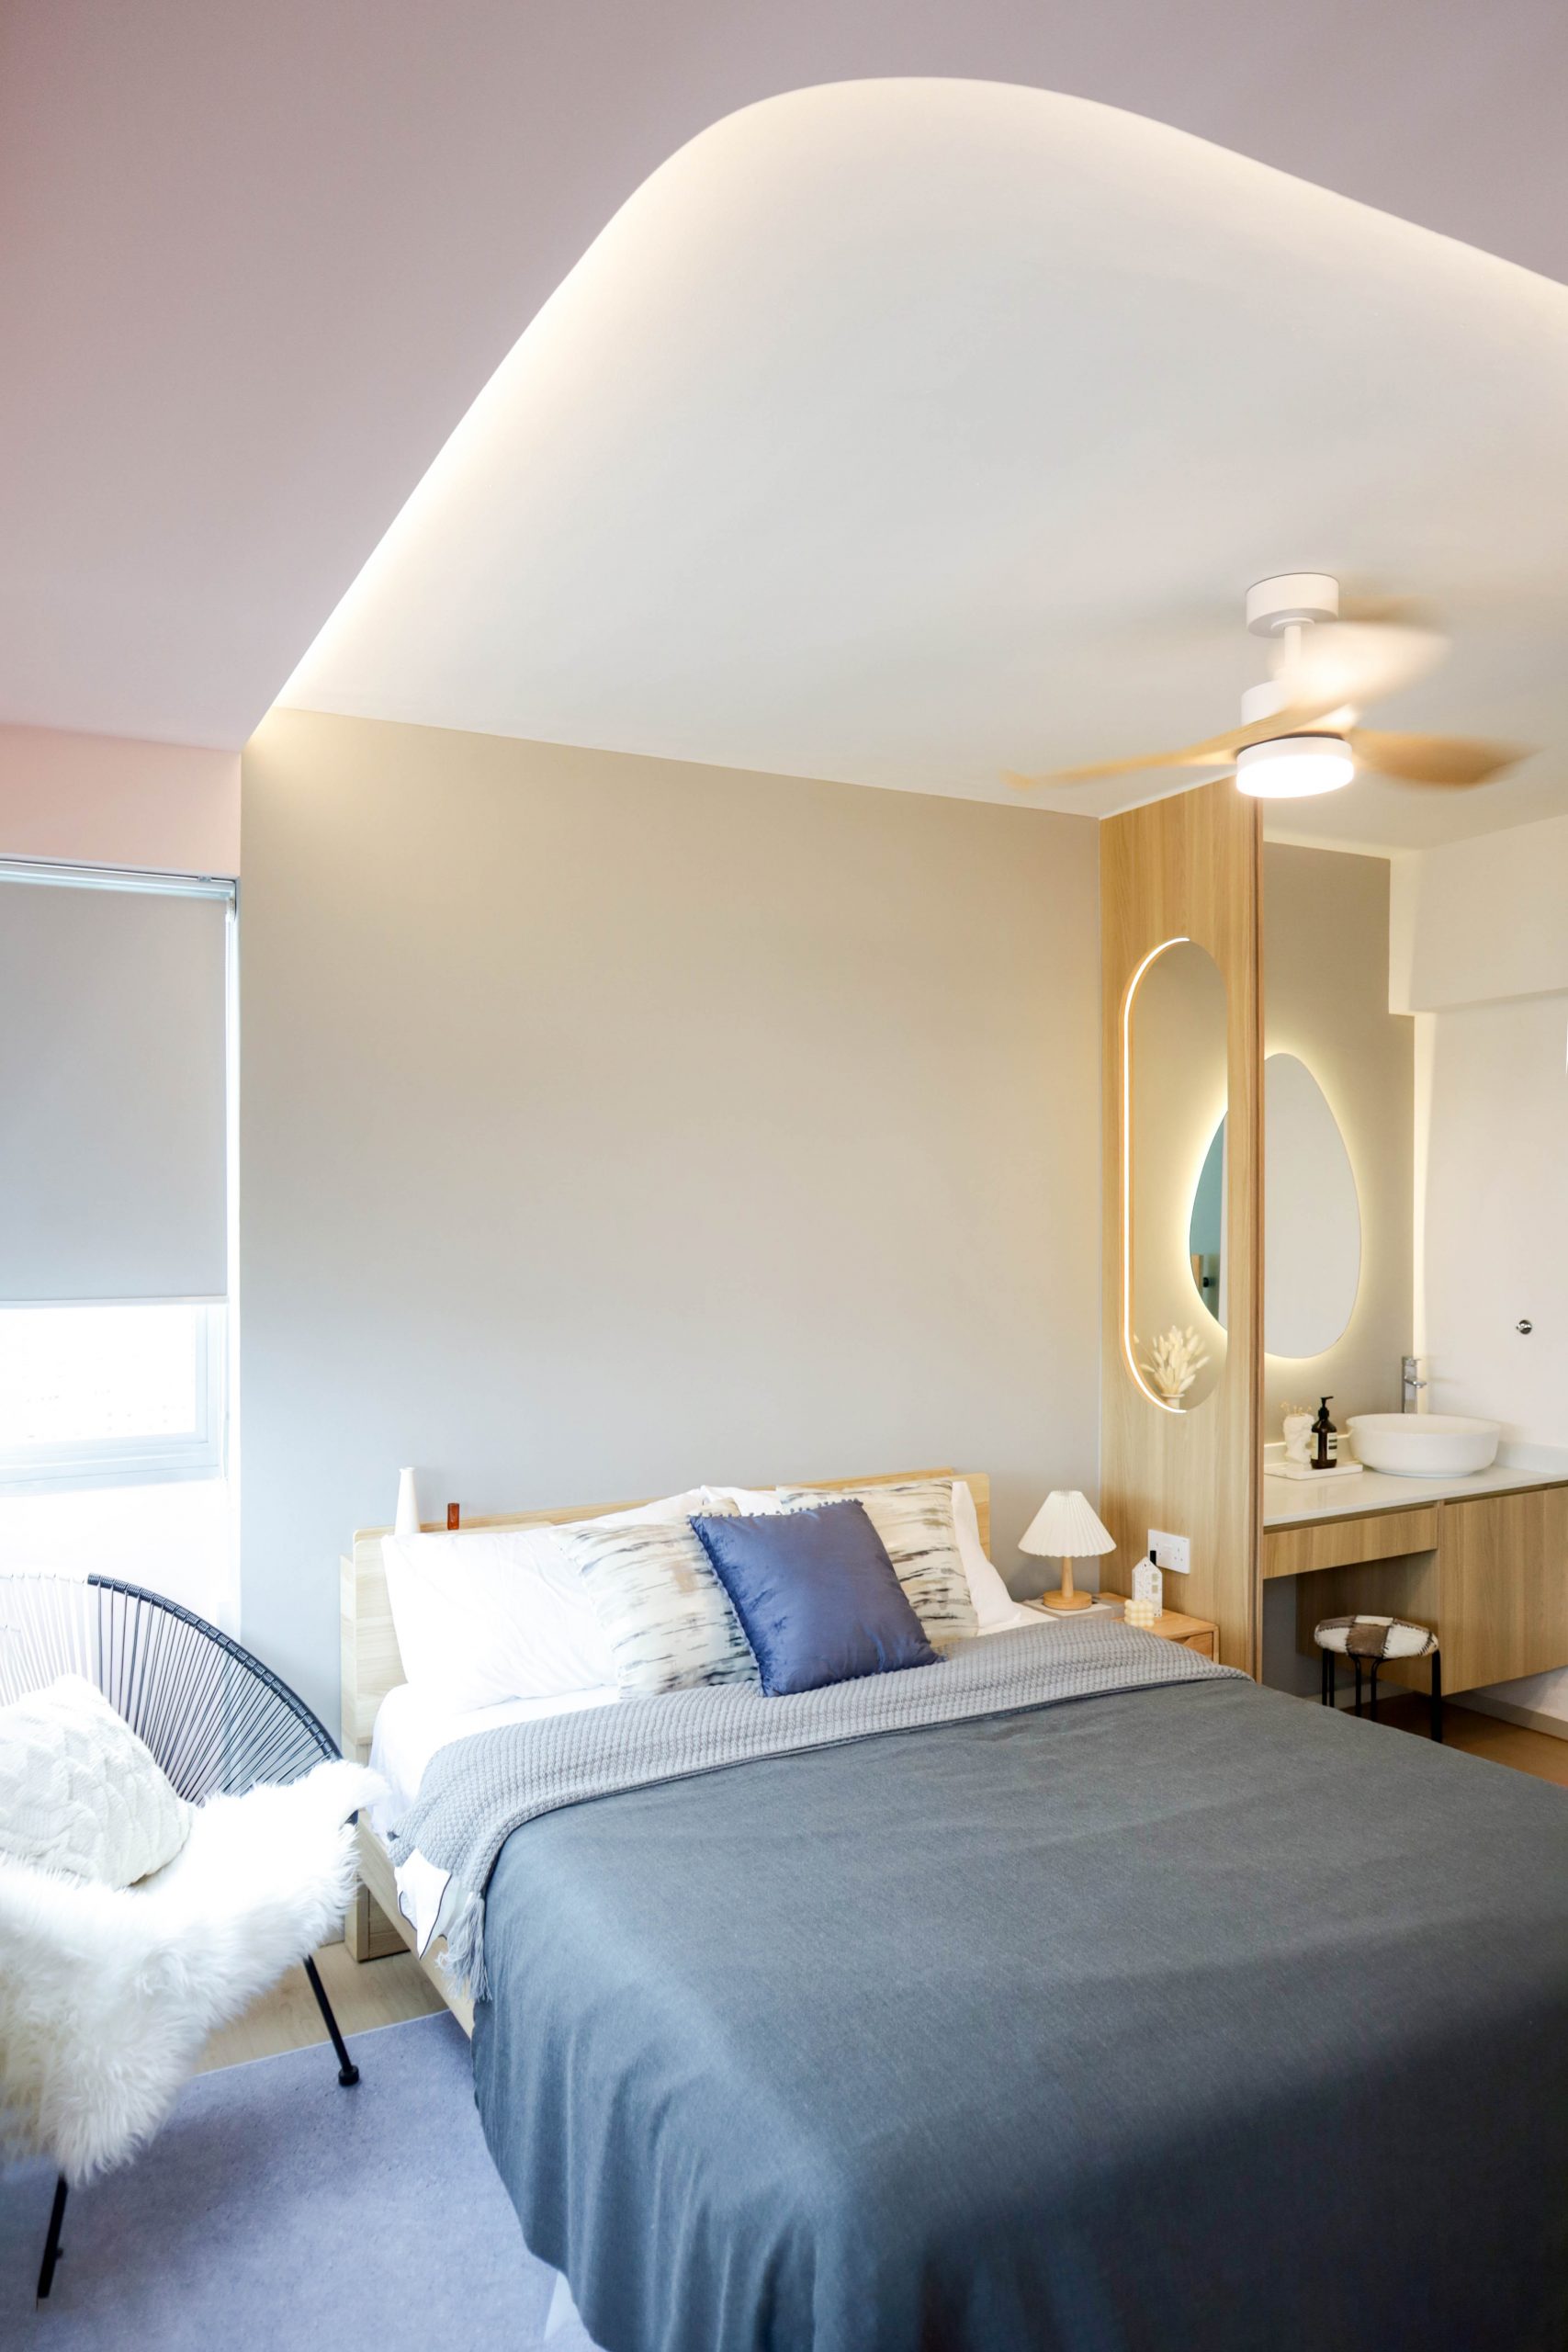 Bachelor Pad Singapore Master Bedroom with Curved Cove Lighting Design and Pink Ceiling